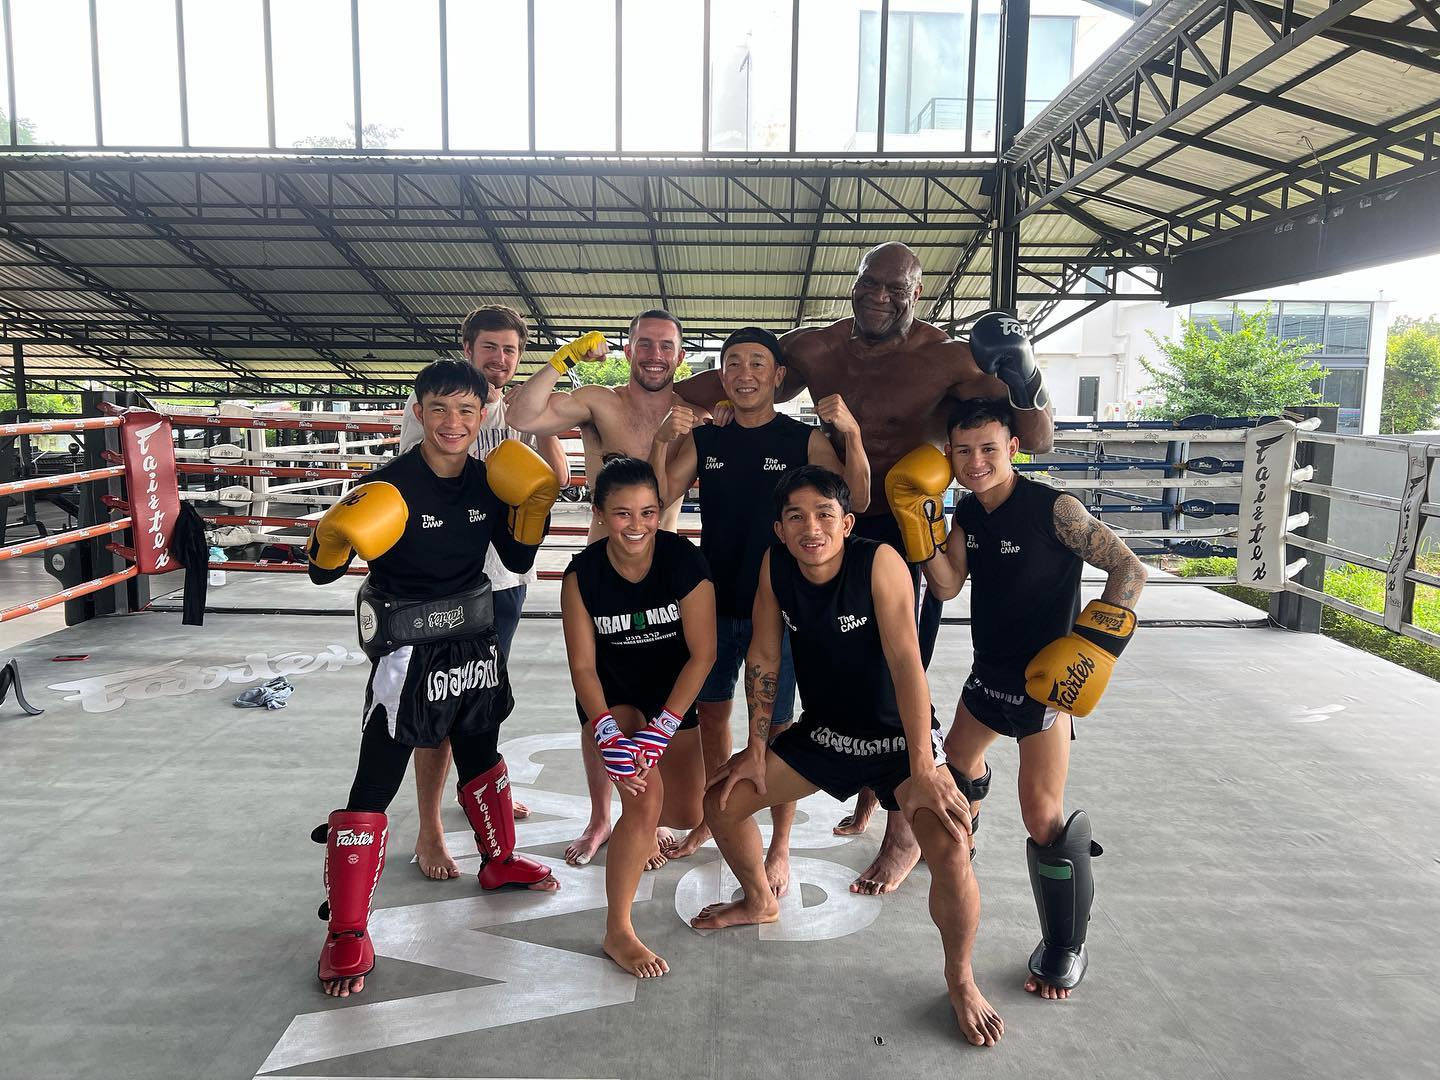  A group of gym members pose in a boxing ring at The Camp Muay Thai Resort and Academy in Chiang Mai